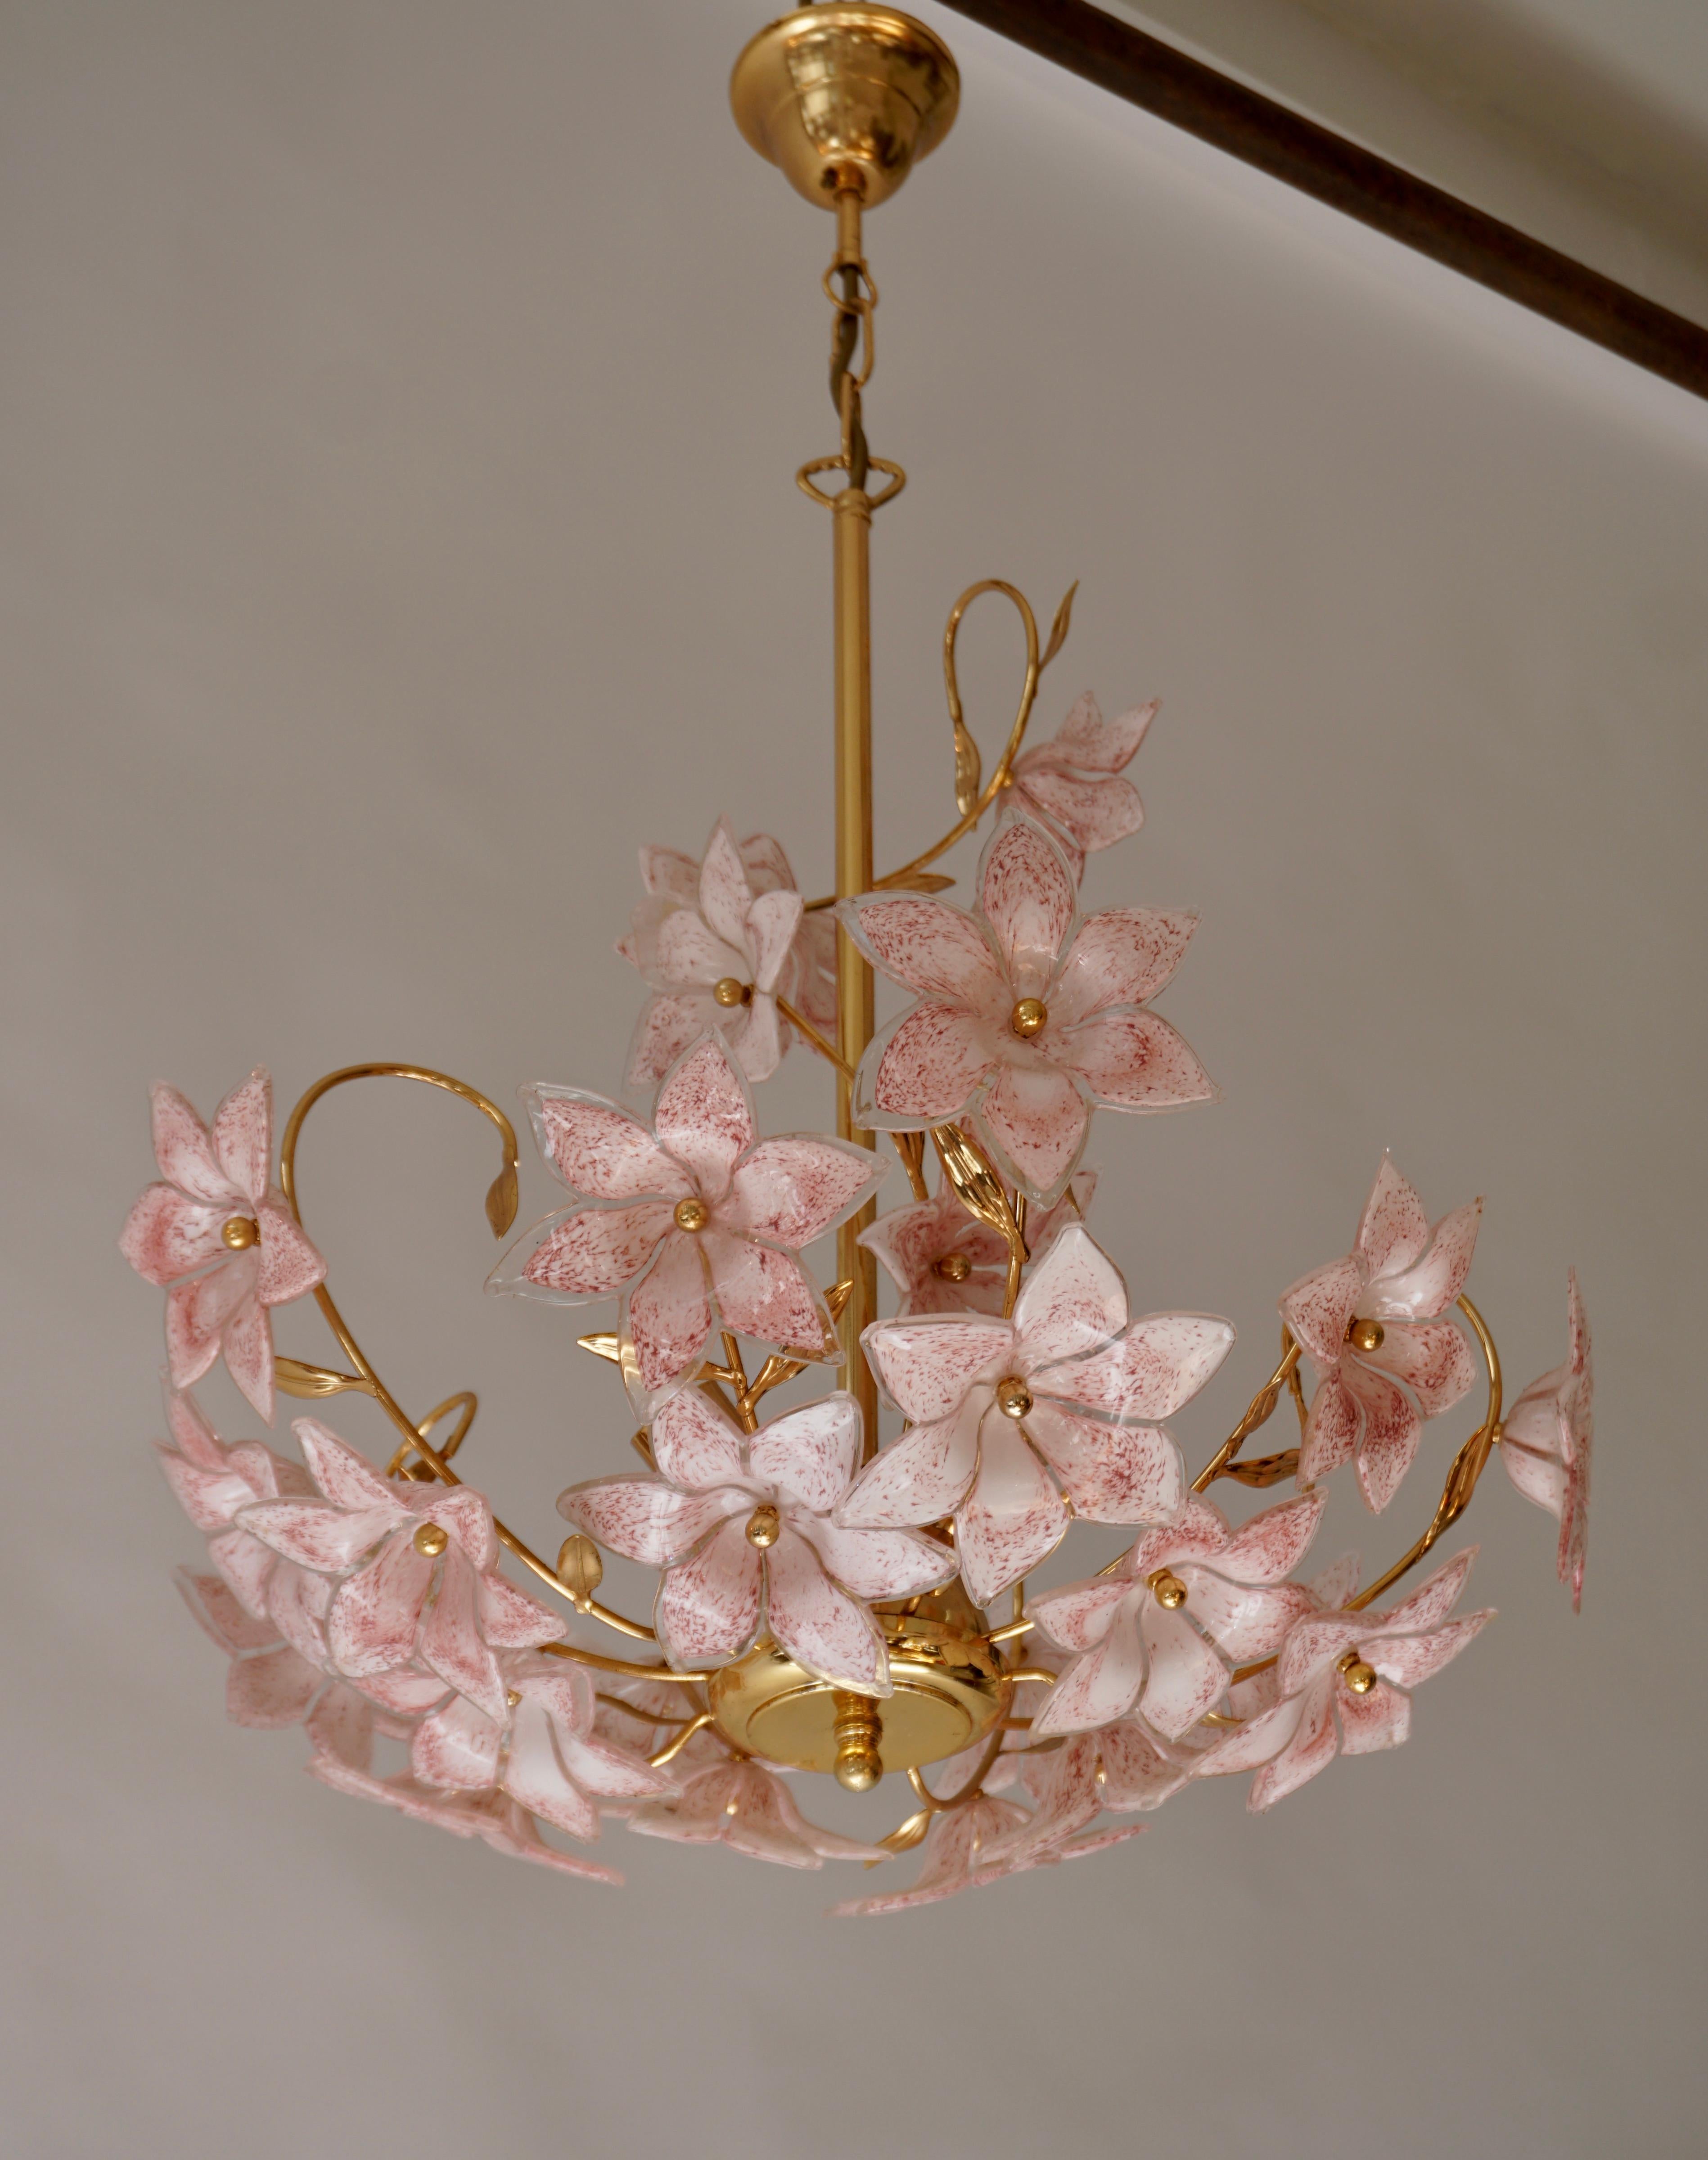 Set of 2 Italian Brass Chandeliers with White Pink Colored Murano Glass Flowers For Sale 6